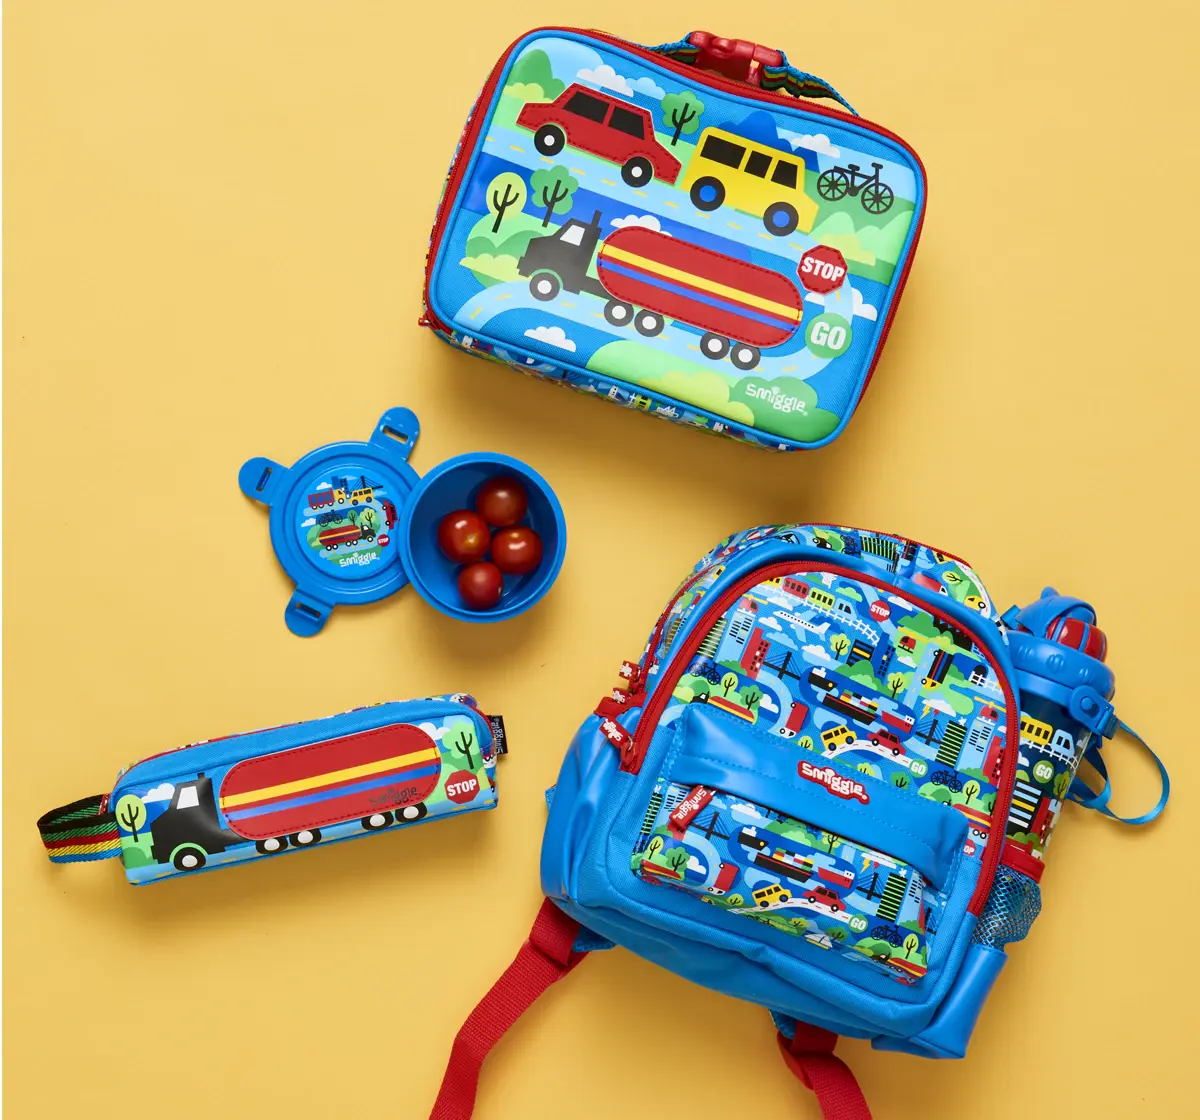 Smiggle Round About Teeny Tiny Backpack, Blue, 3Y+